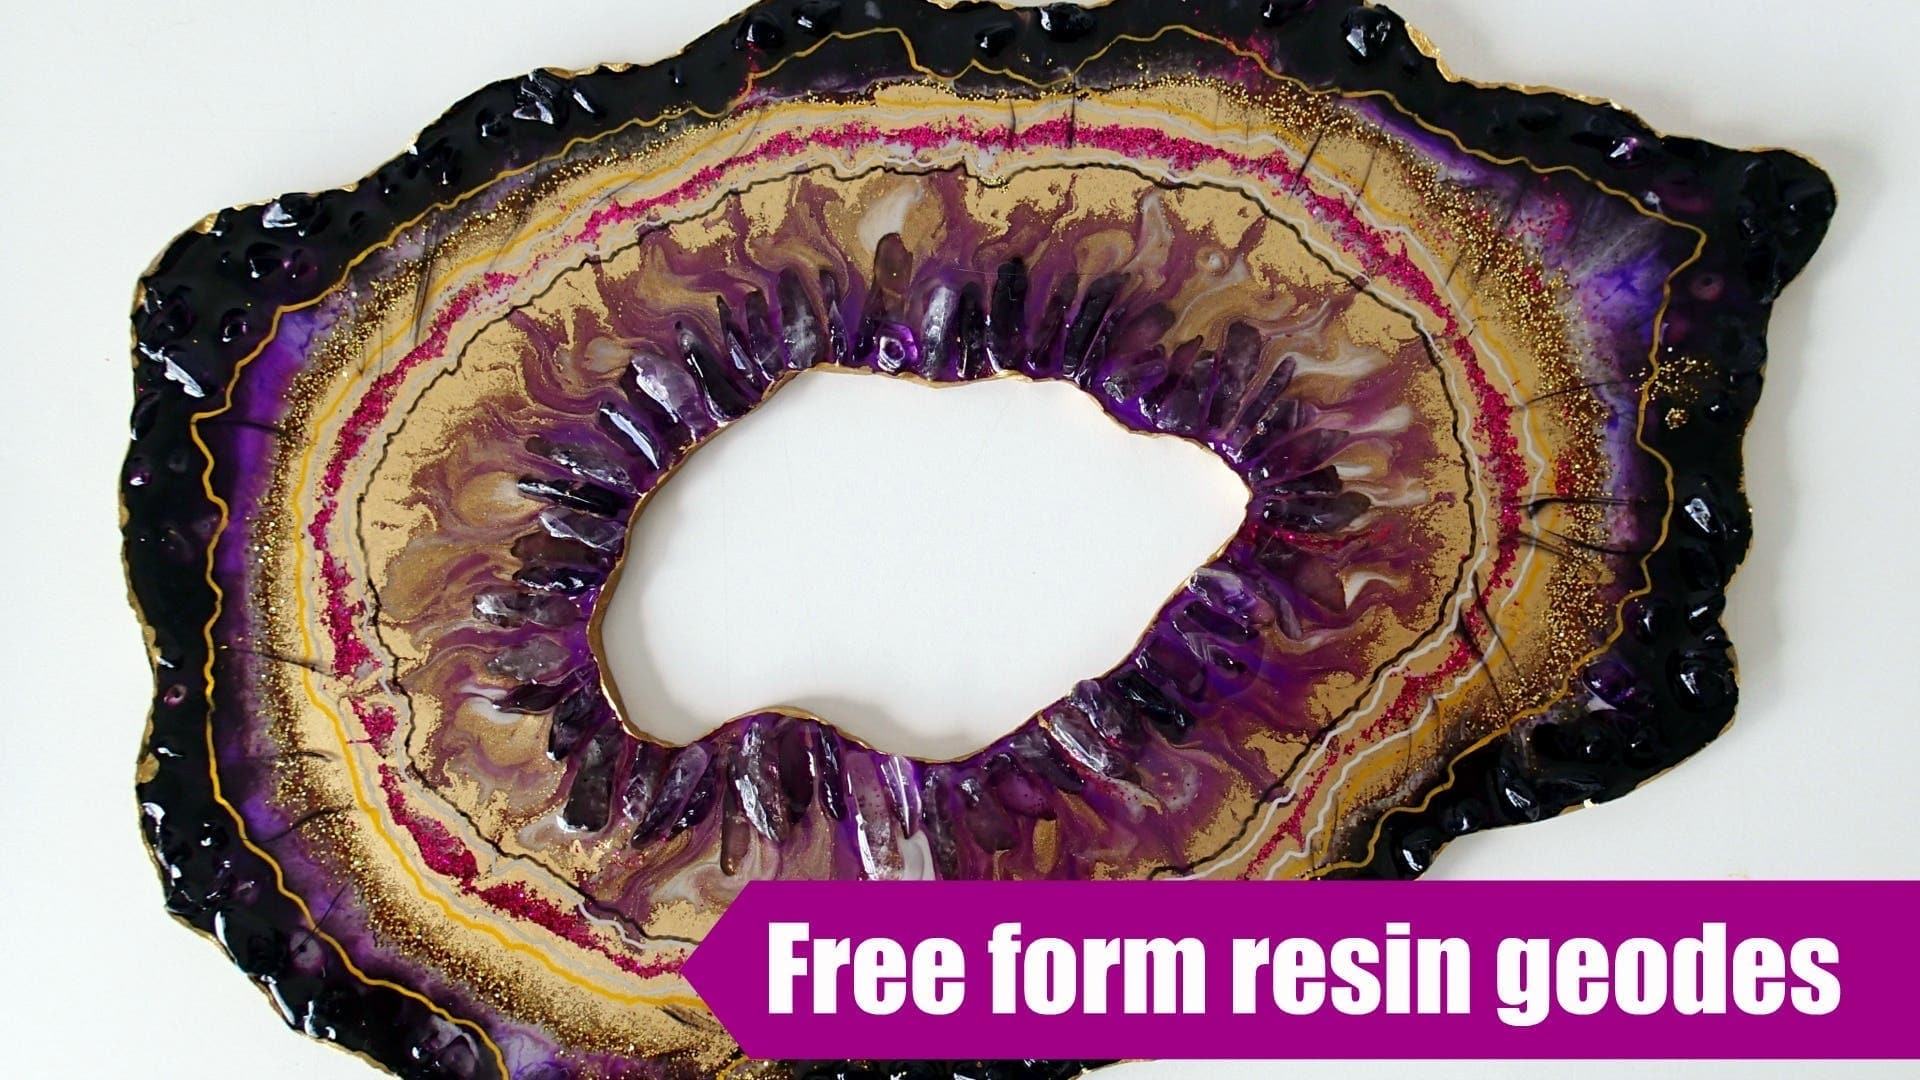 How To Make Free-form Resin Geodes and Agate Slices - Craft Resin